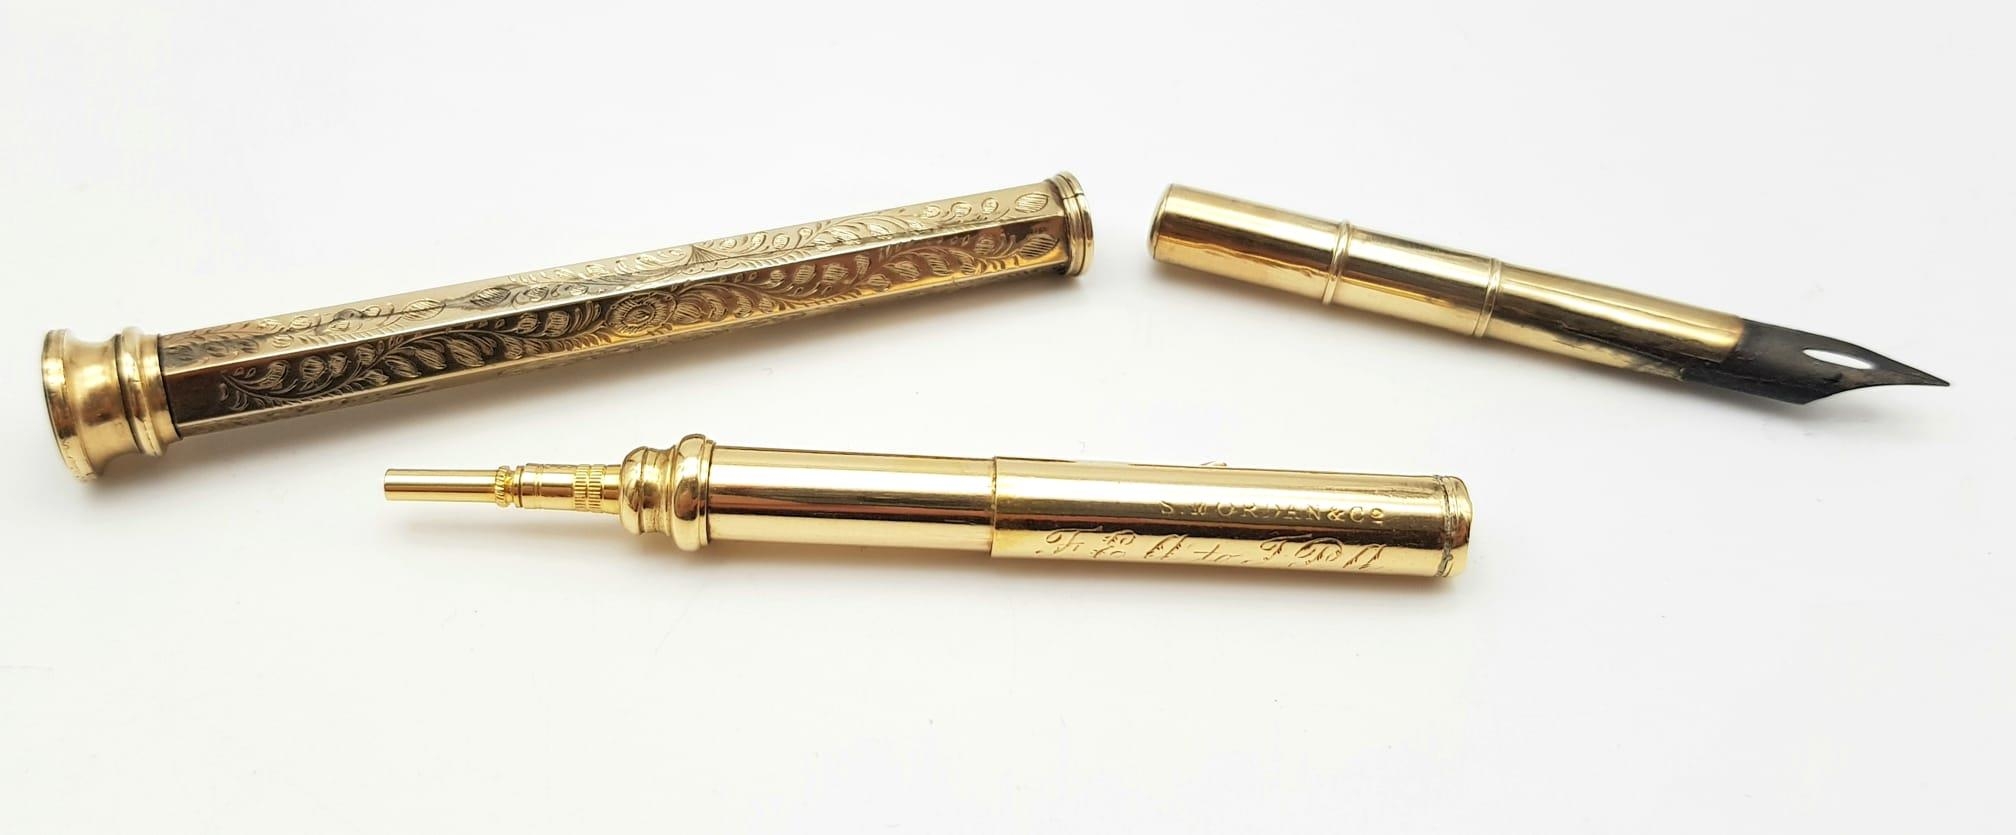 A 9K Yellow Gold Victorian Bloodstone Fountain Pen with a 9K Yellow Gold Edwardian S. Morden and